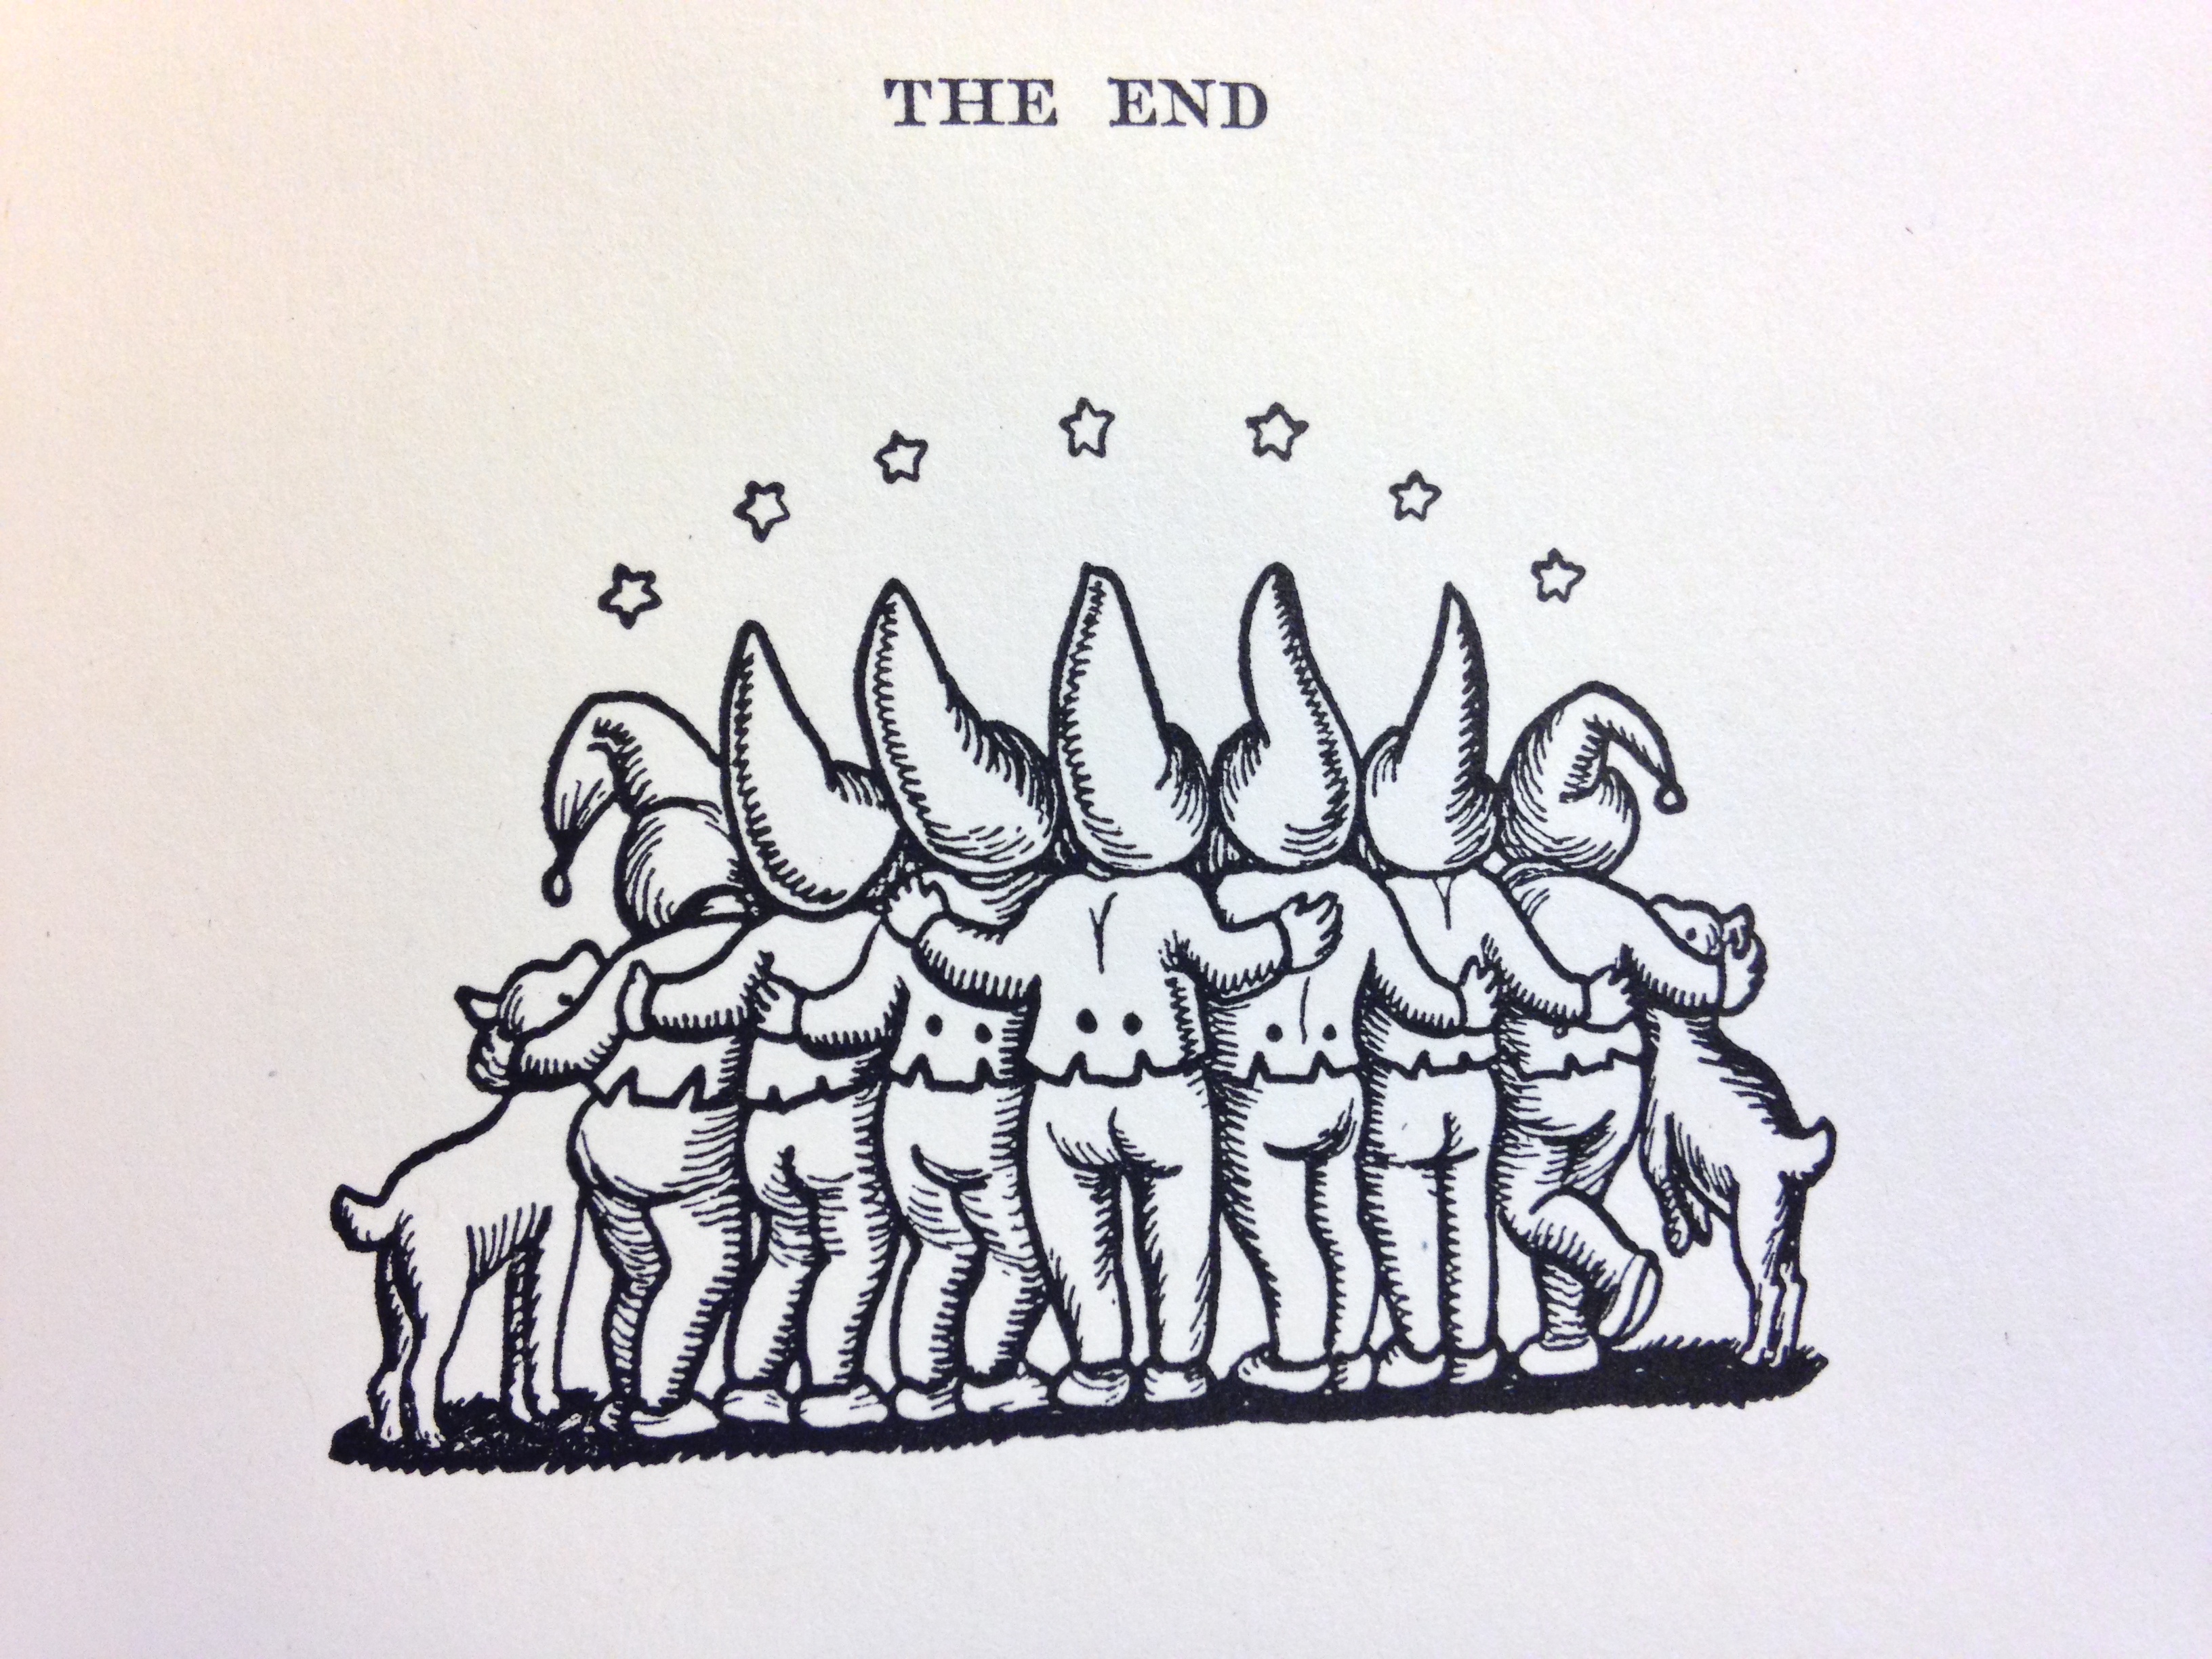 Ending page with the seven dwarves